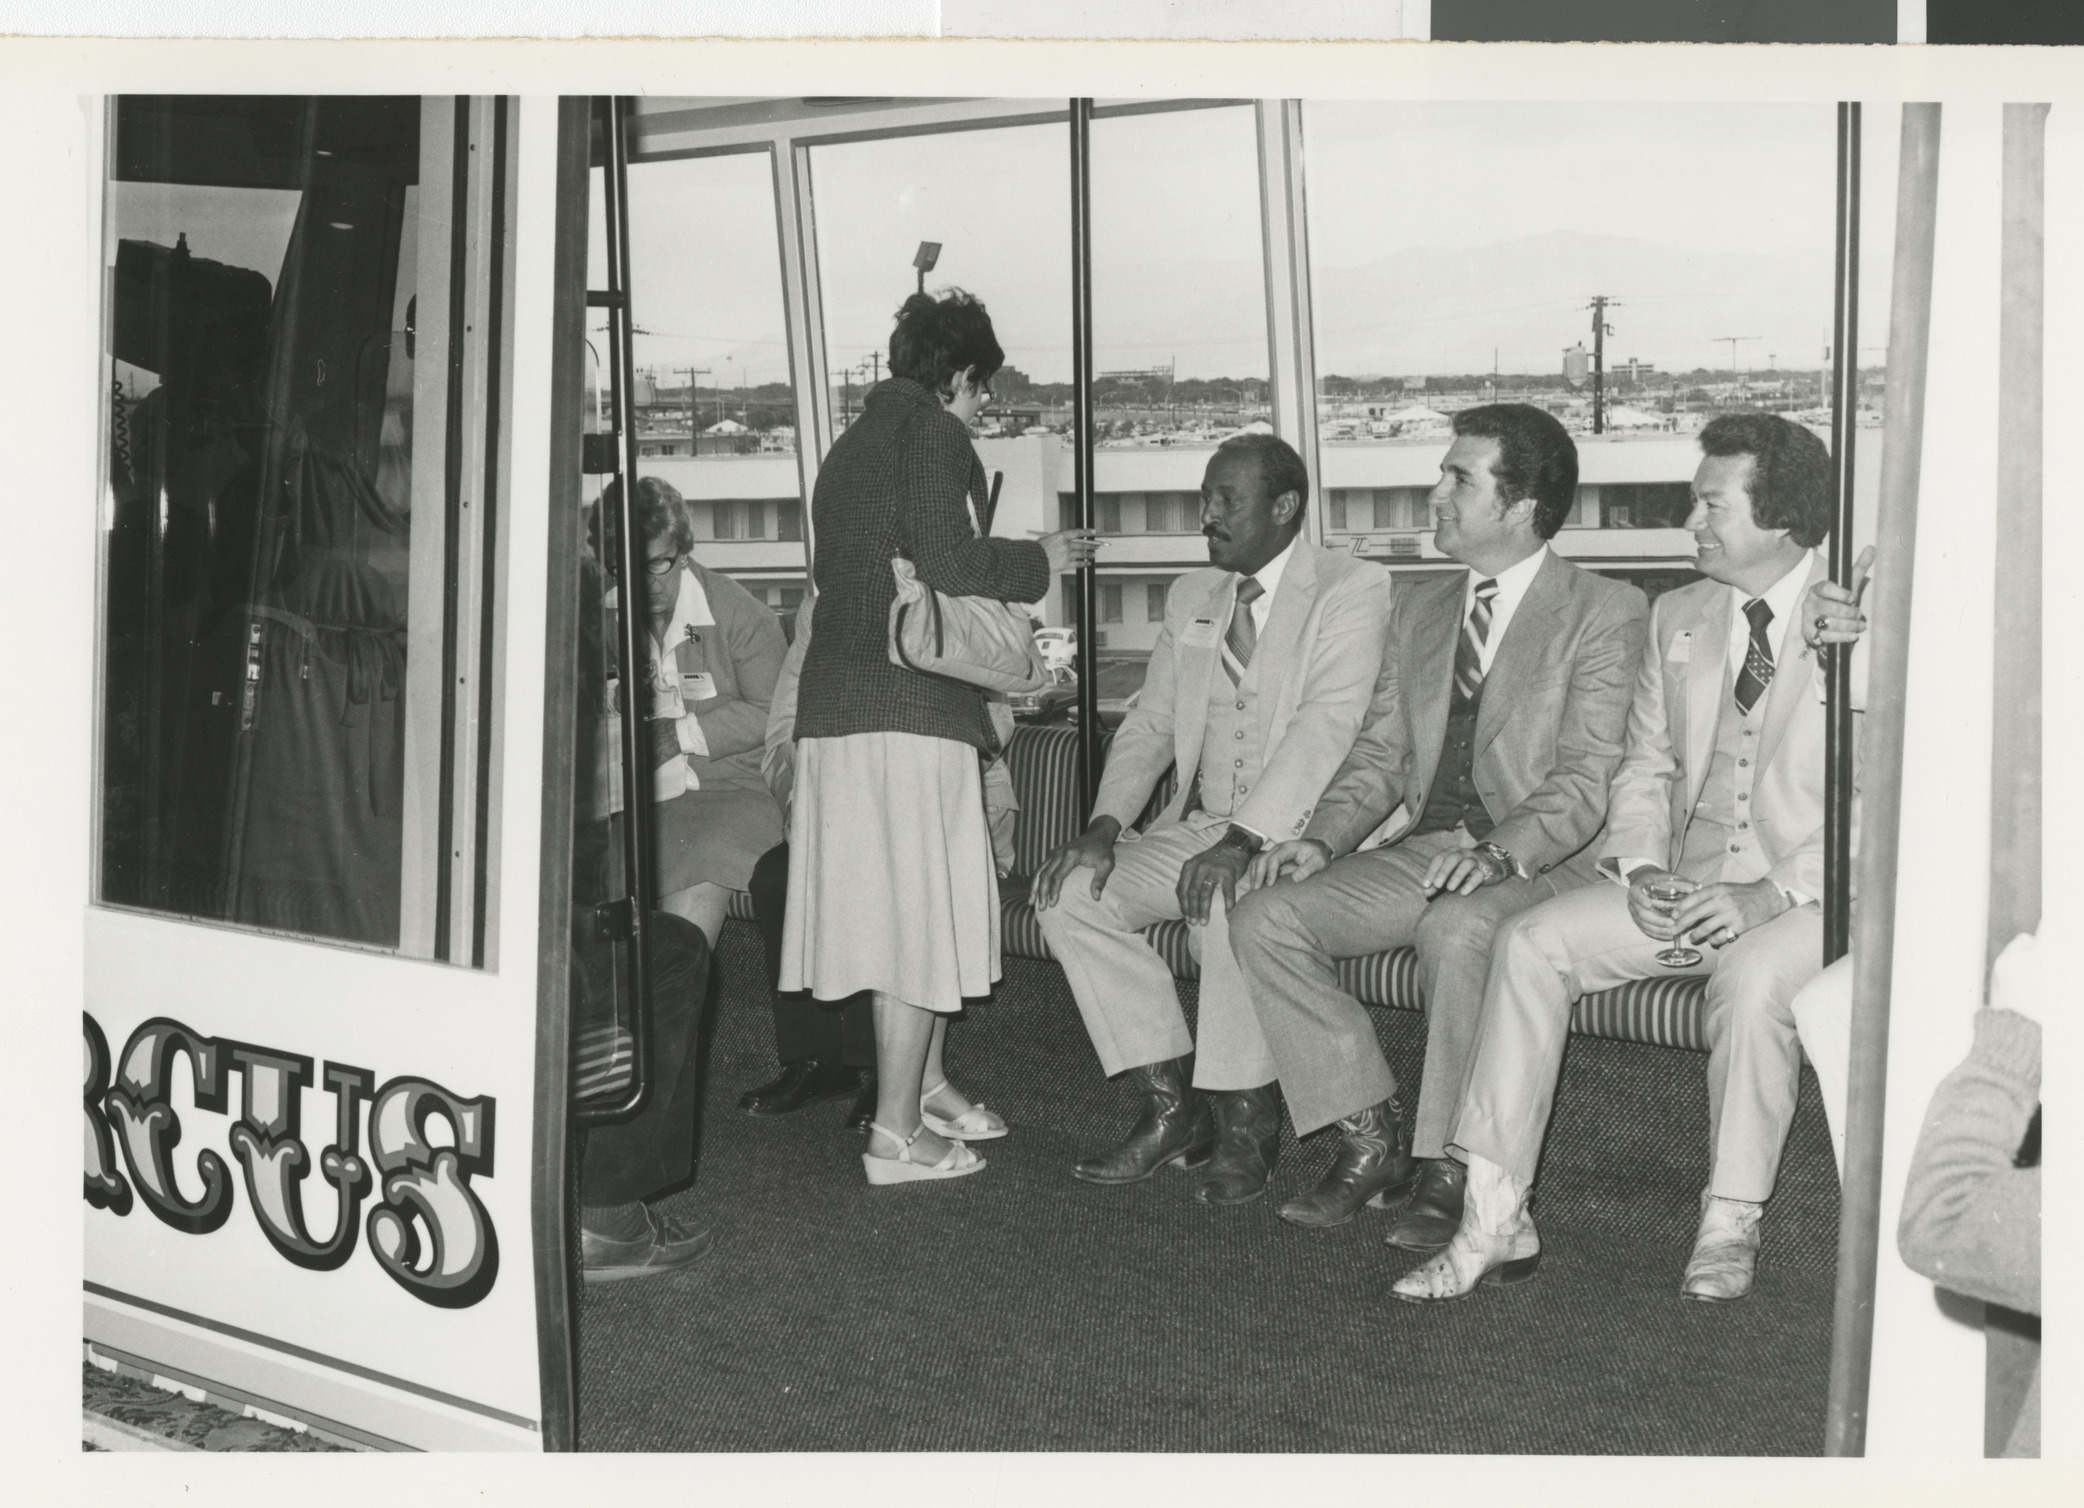 Photograph of group of men, including Commissioner Ron Lurie, on a bus, shuttle or train